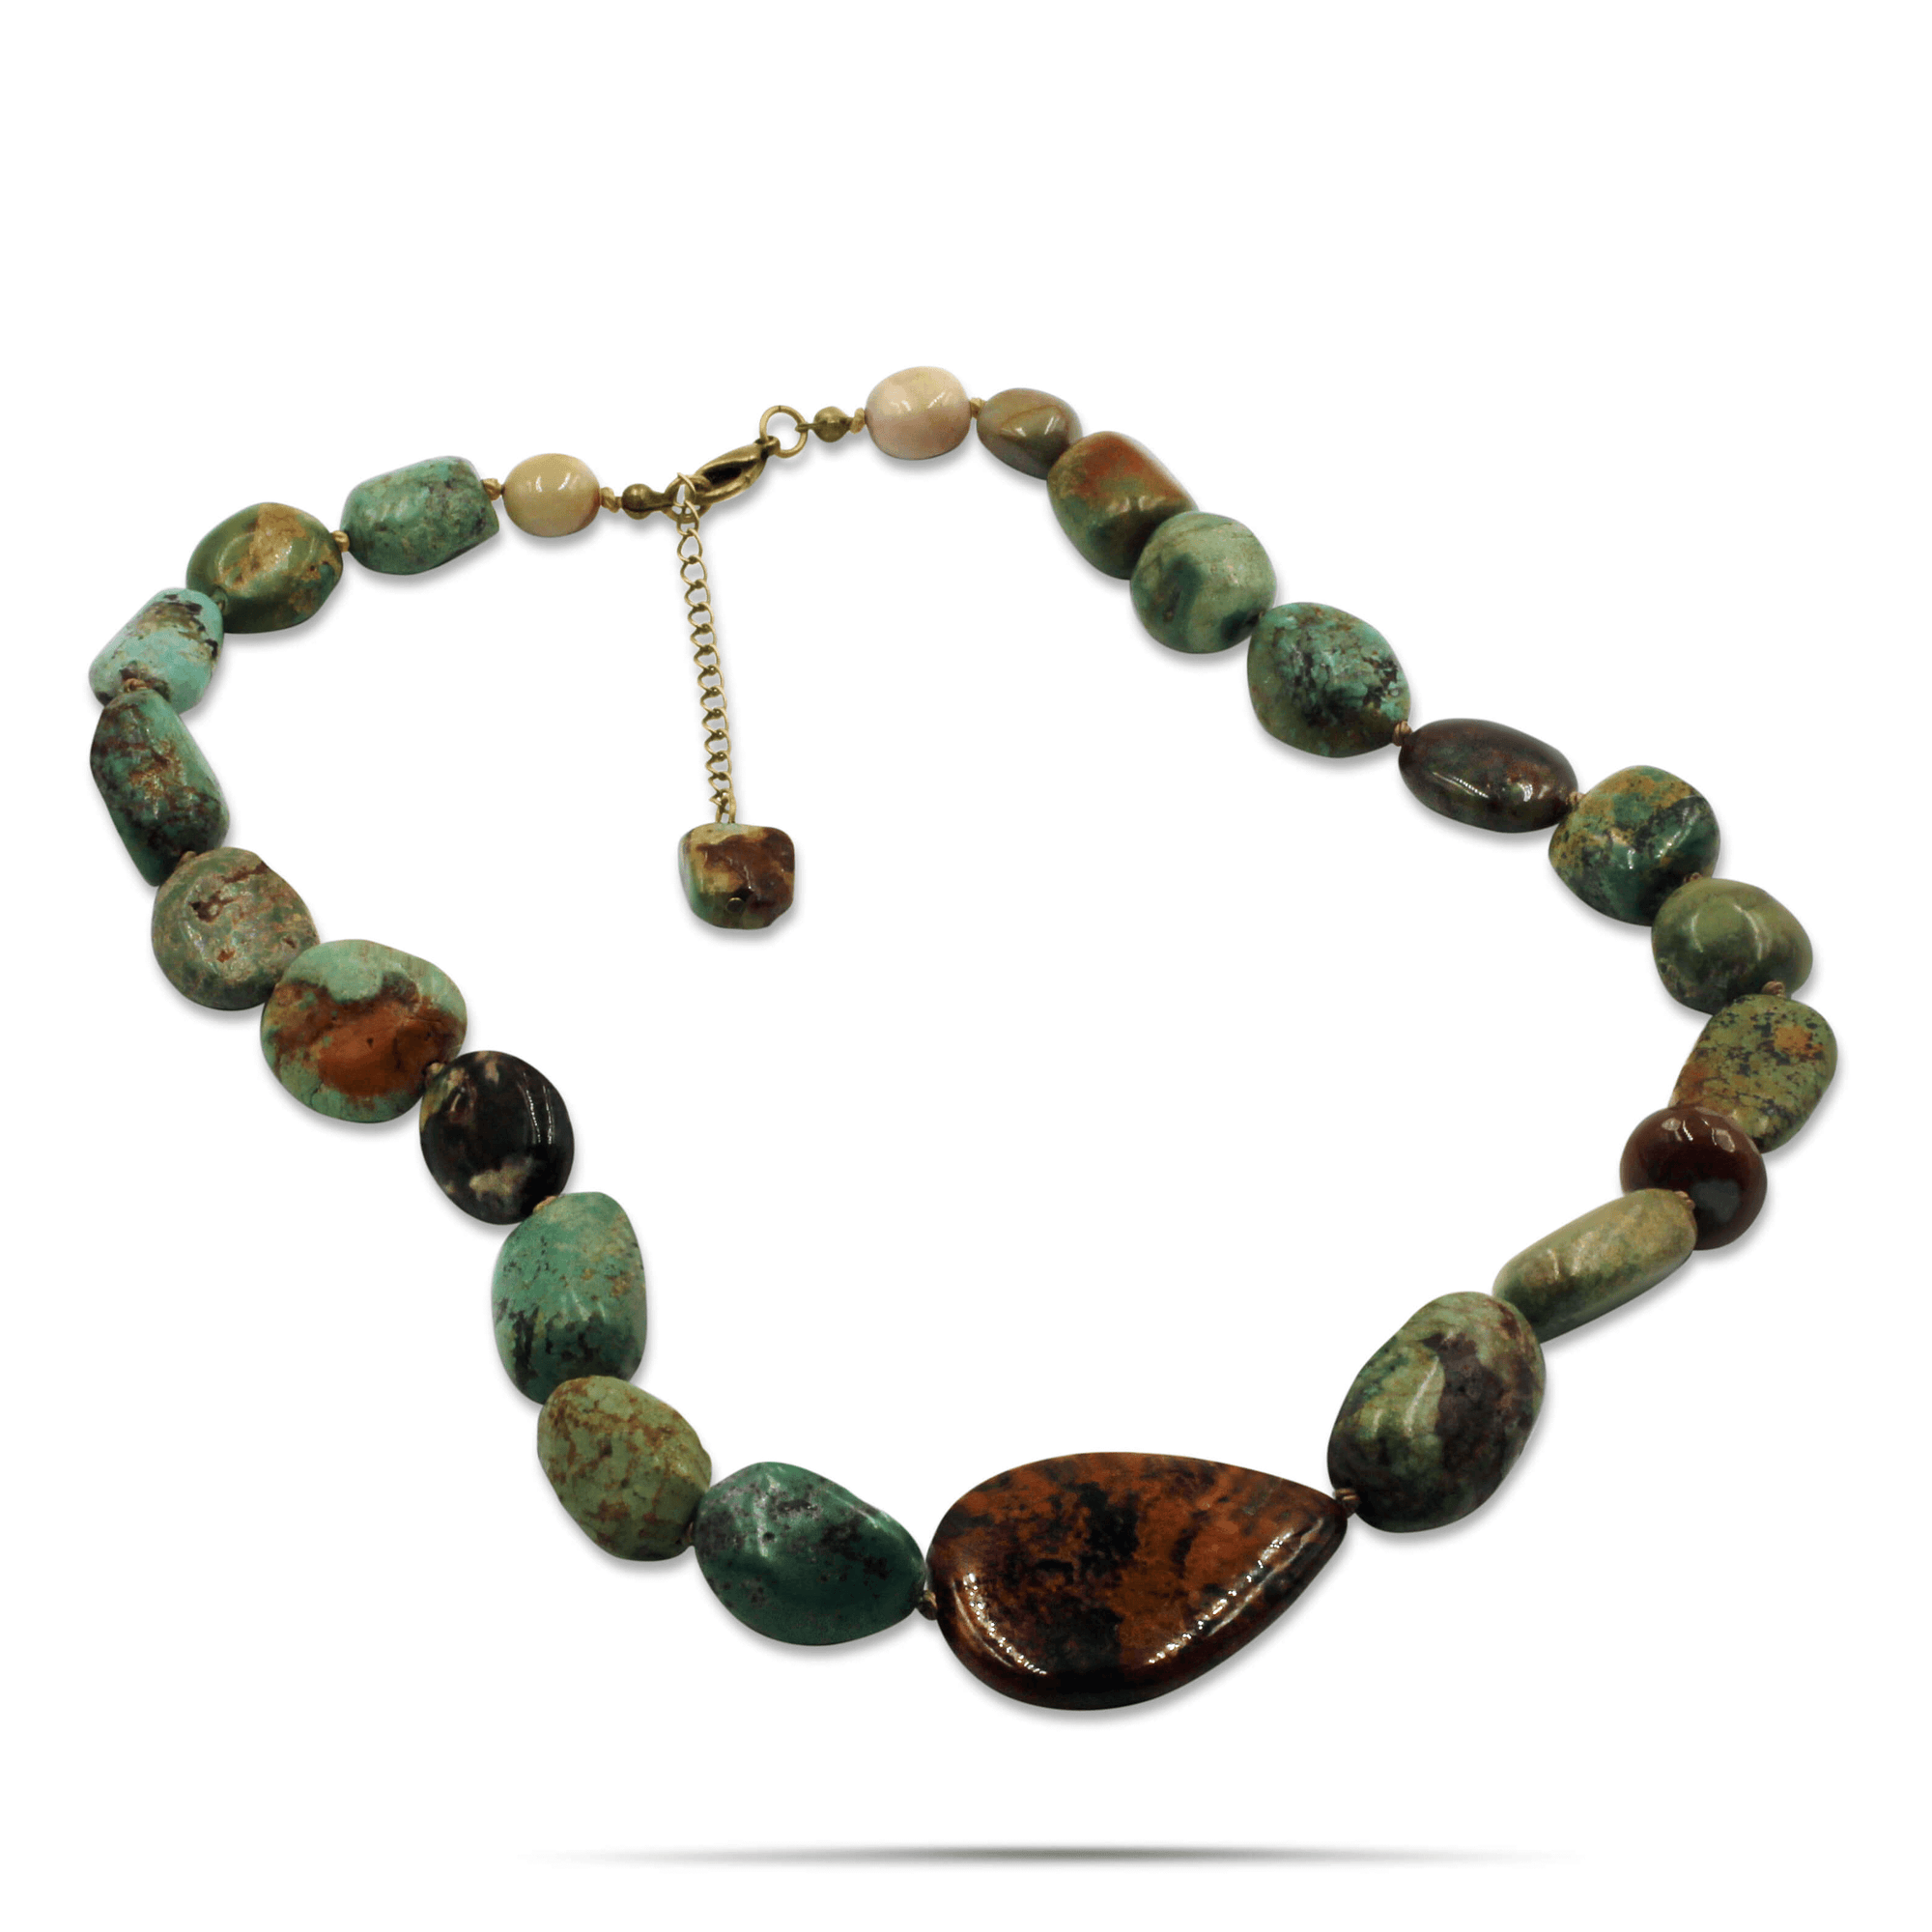 Ruth Ann Hand-knotted Turquoise, Jasper Pendant Necklace-Necklaces- Creative Jewelry by Marcia